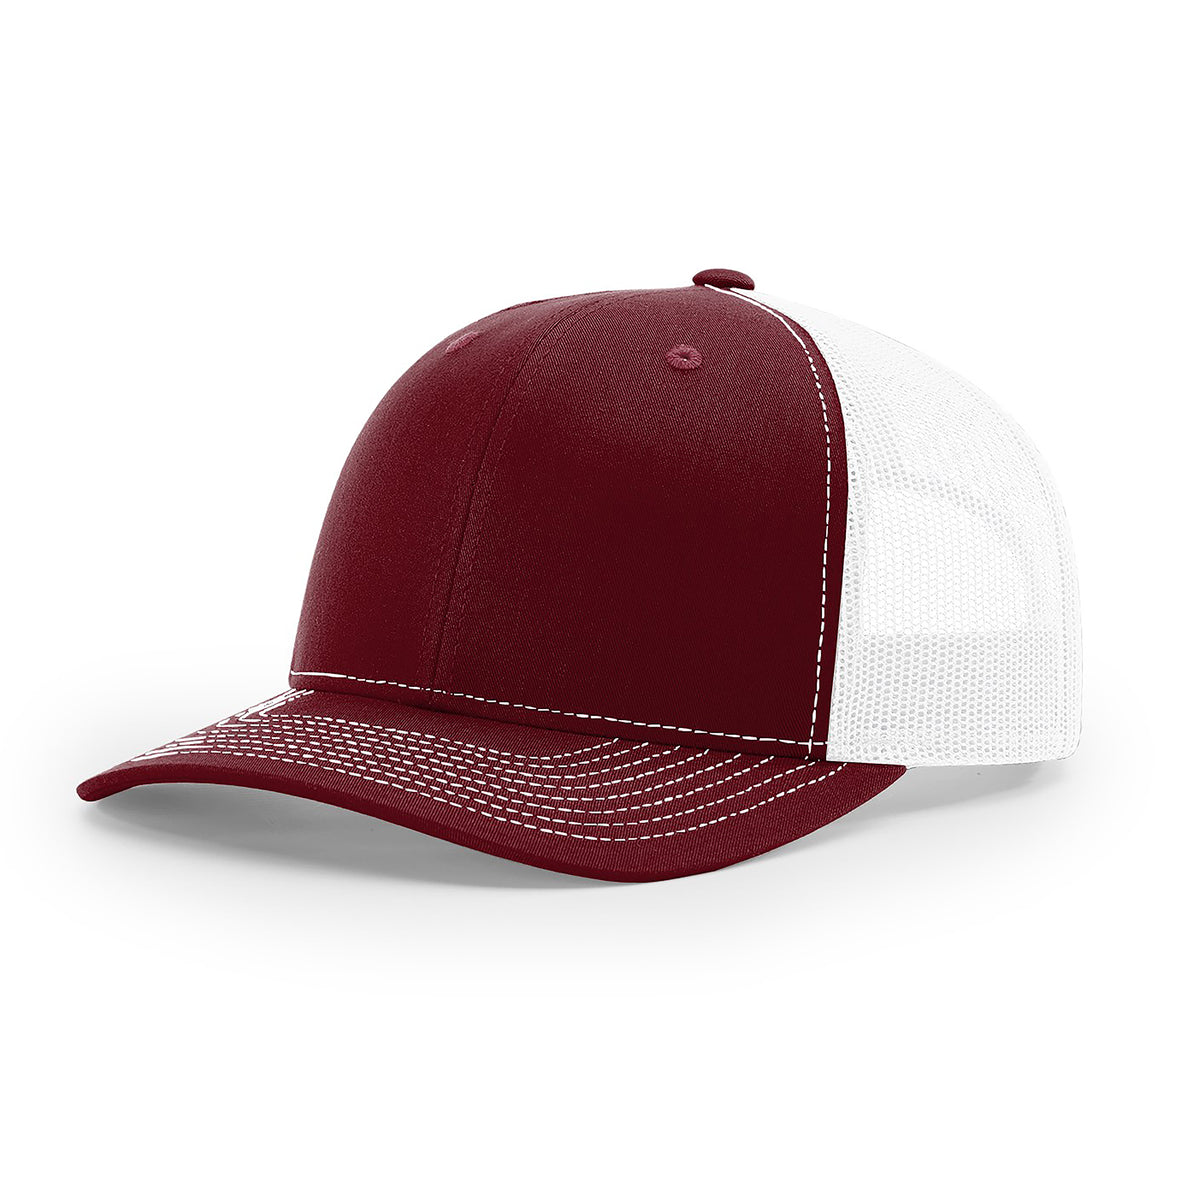 Custom Leather Patch Hat $25 Special! – NDesignsLeather